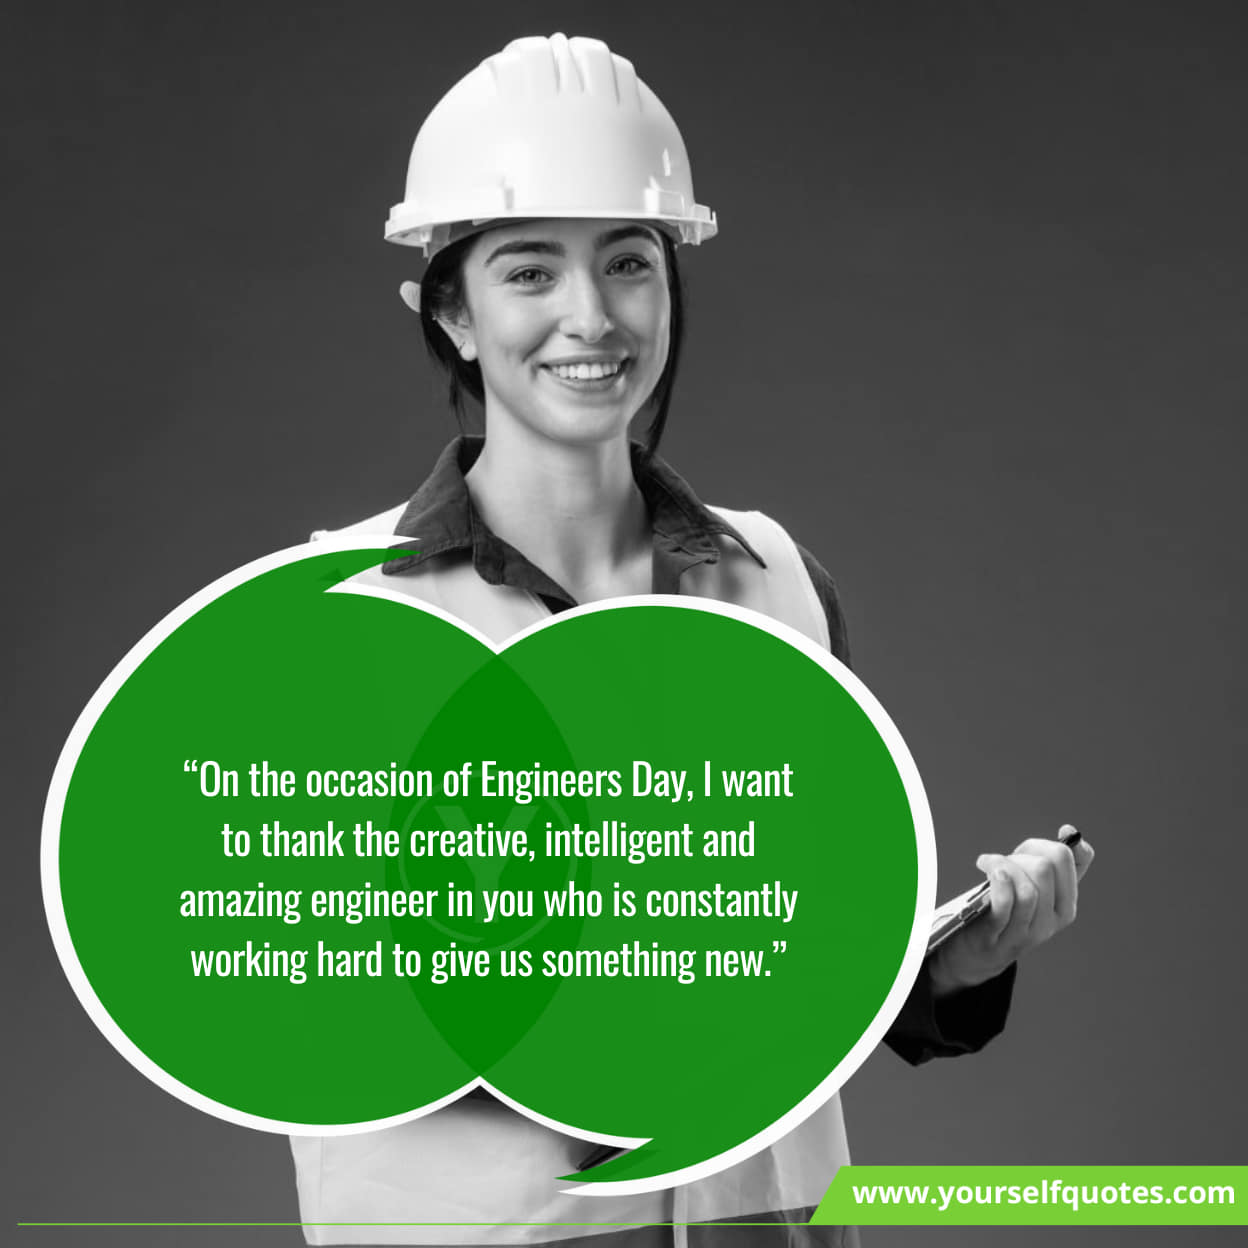 Slogans and Sayings On Happy Engineers Day